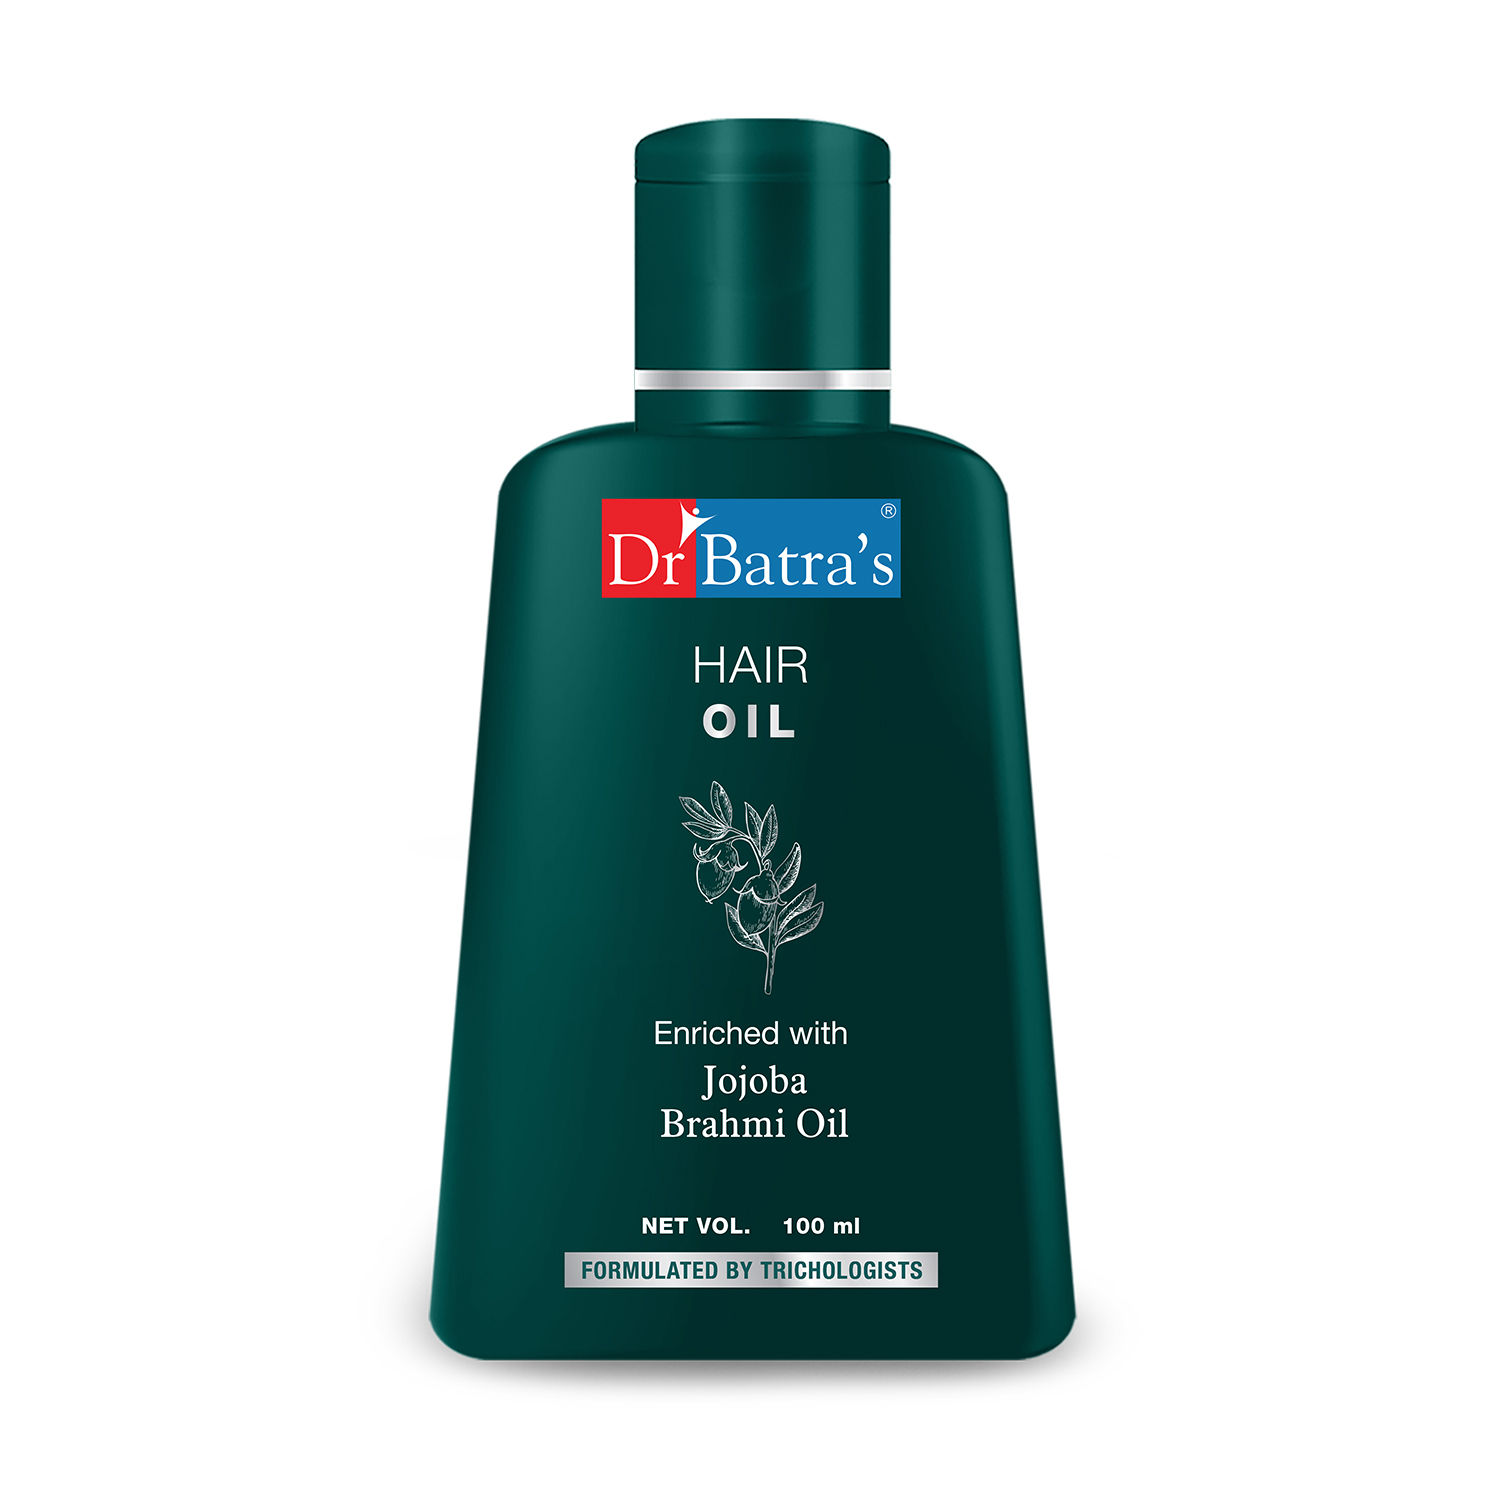 Buy Dr Batra’s Hair Oil. Non-Sticky Formula. Nourishes Scalp. Supports Hair Growth. Contains Jojoba, Brahmi extracts. Suitable for men and women. 100 ml - Purplle